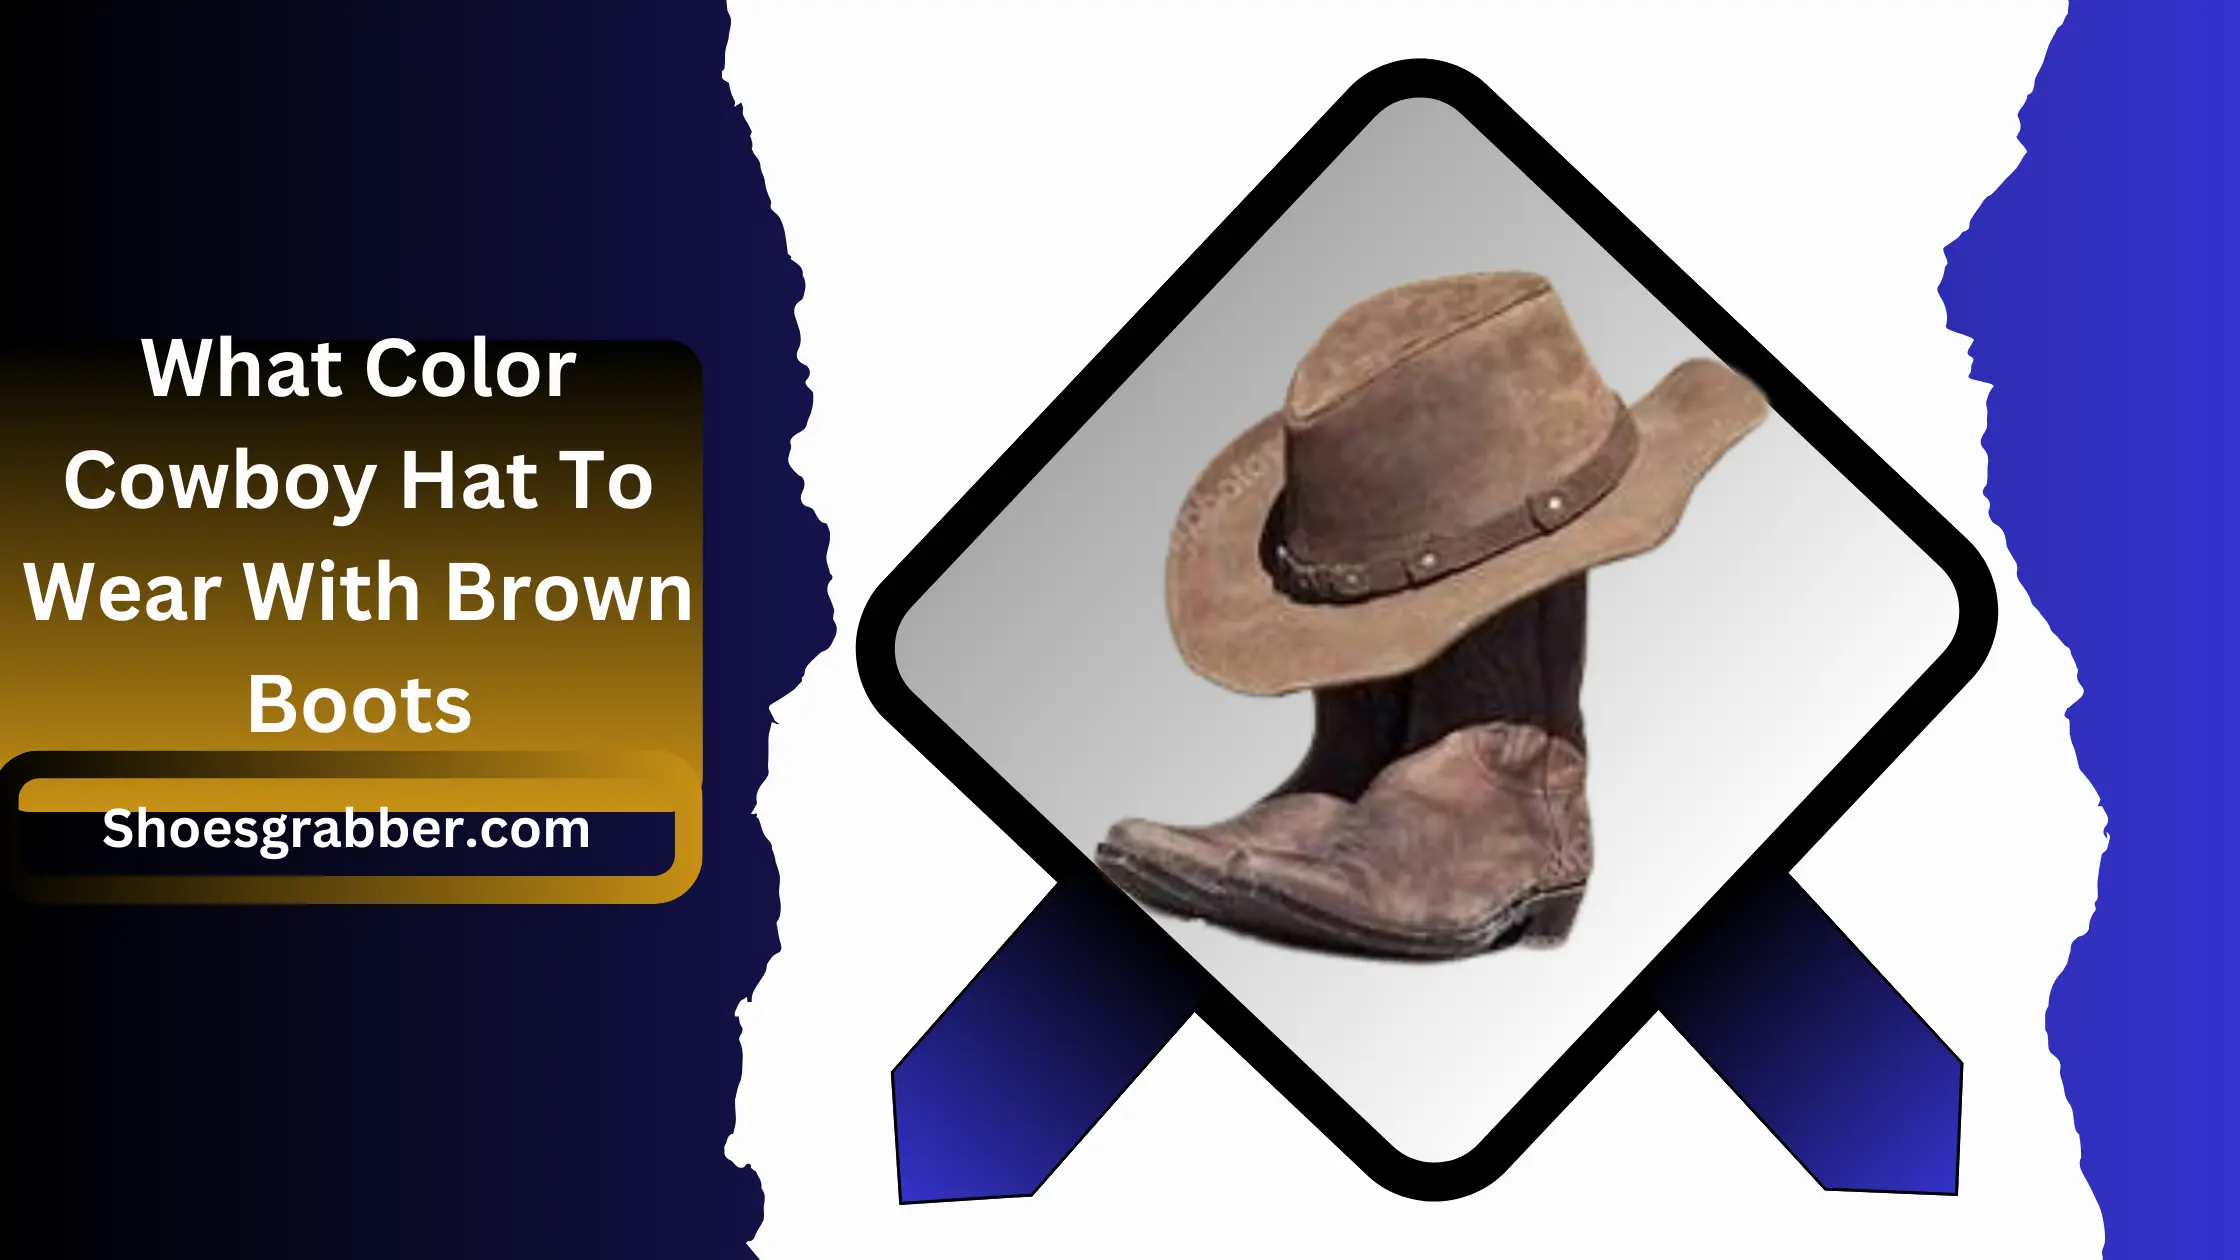 What Color Cowboy Hat To Wear With Brown Boots - The Perfect Color Combo